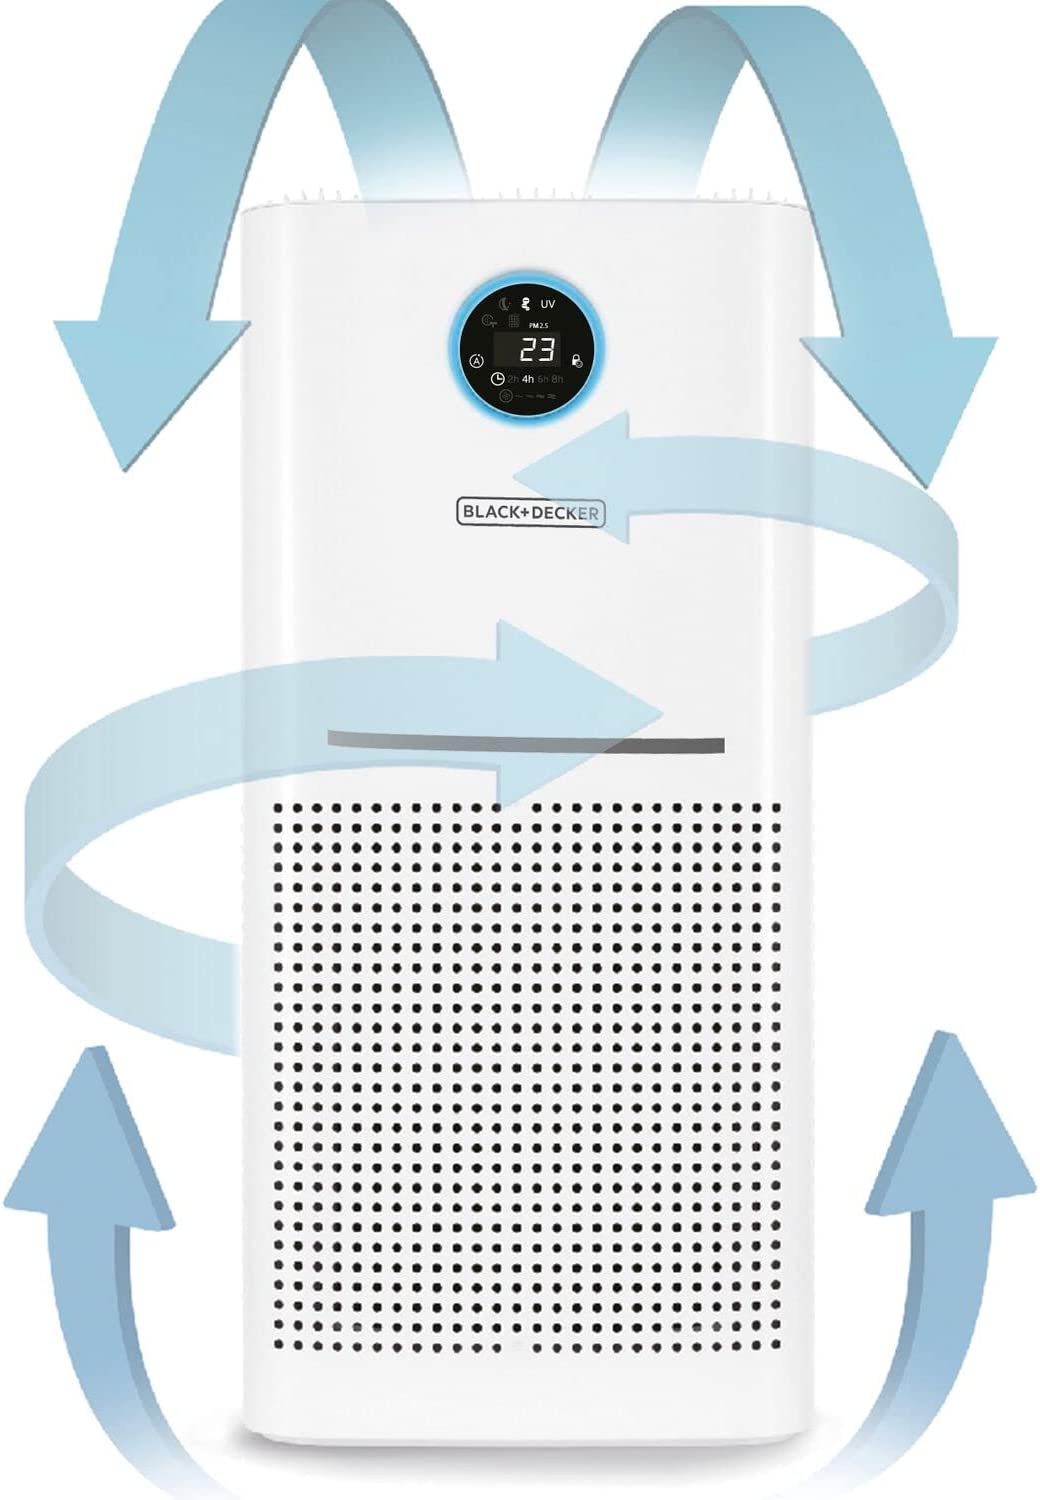 Air Purifier AP3560 for Large Room upto 60m2 HEPA 13 air filter